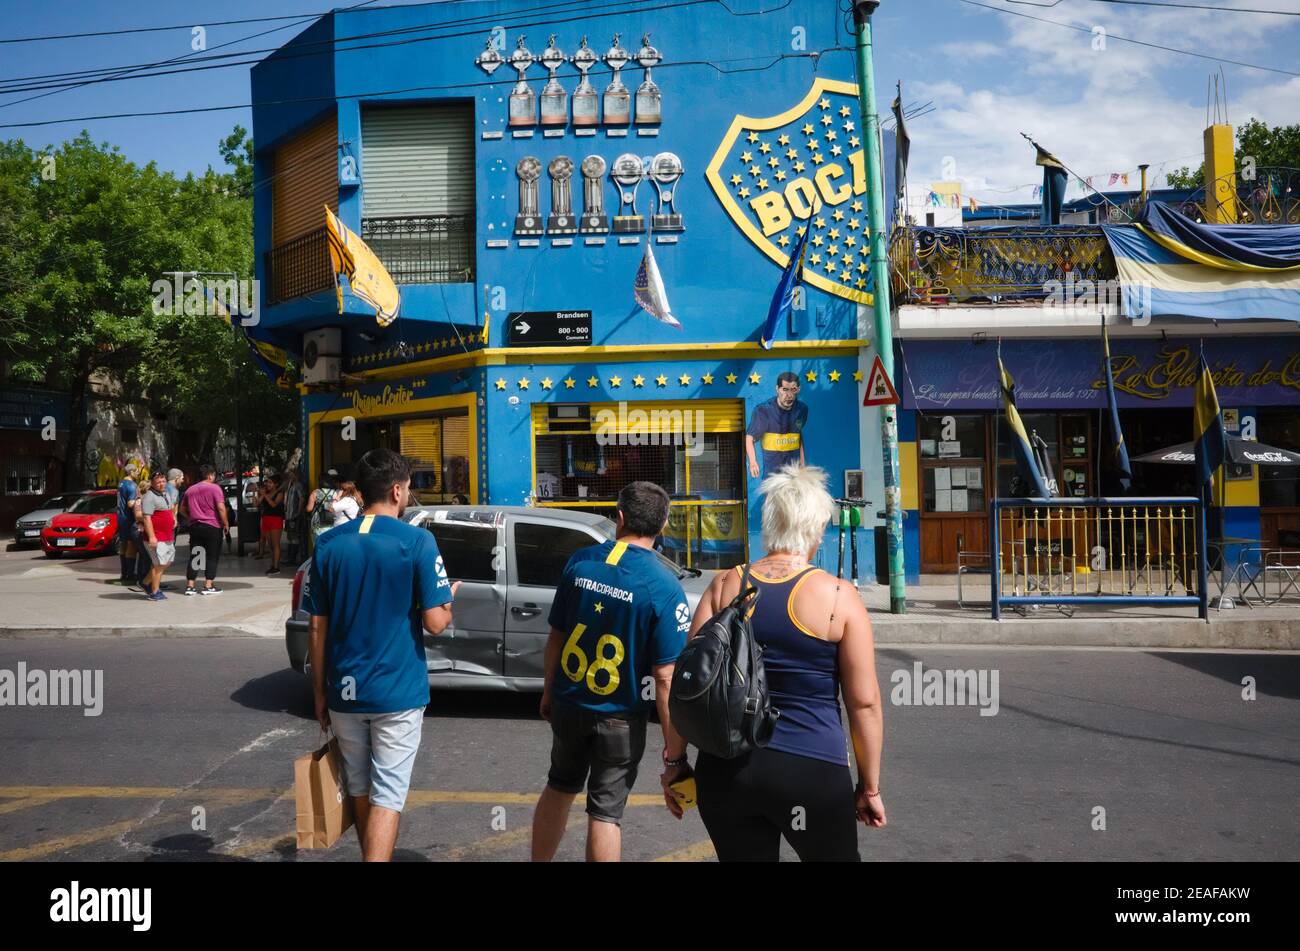 Buenos Aires, Argentina - January, 2020: Football fans of Boca Juniors club crossing road near La Bombonera stadium and fan shop in front of it Stock Photo